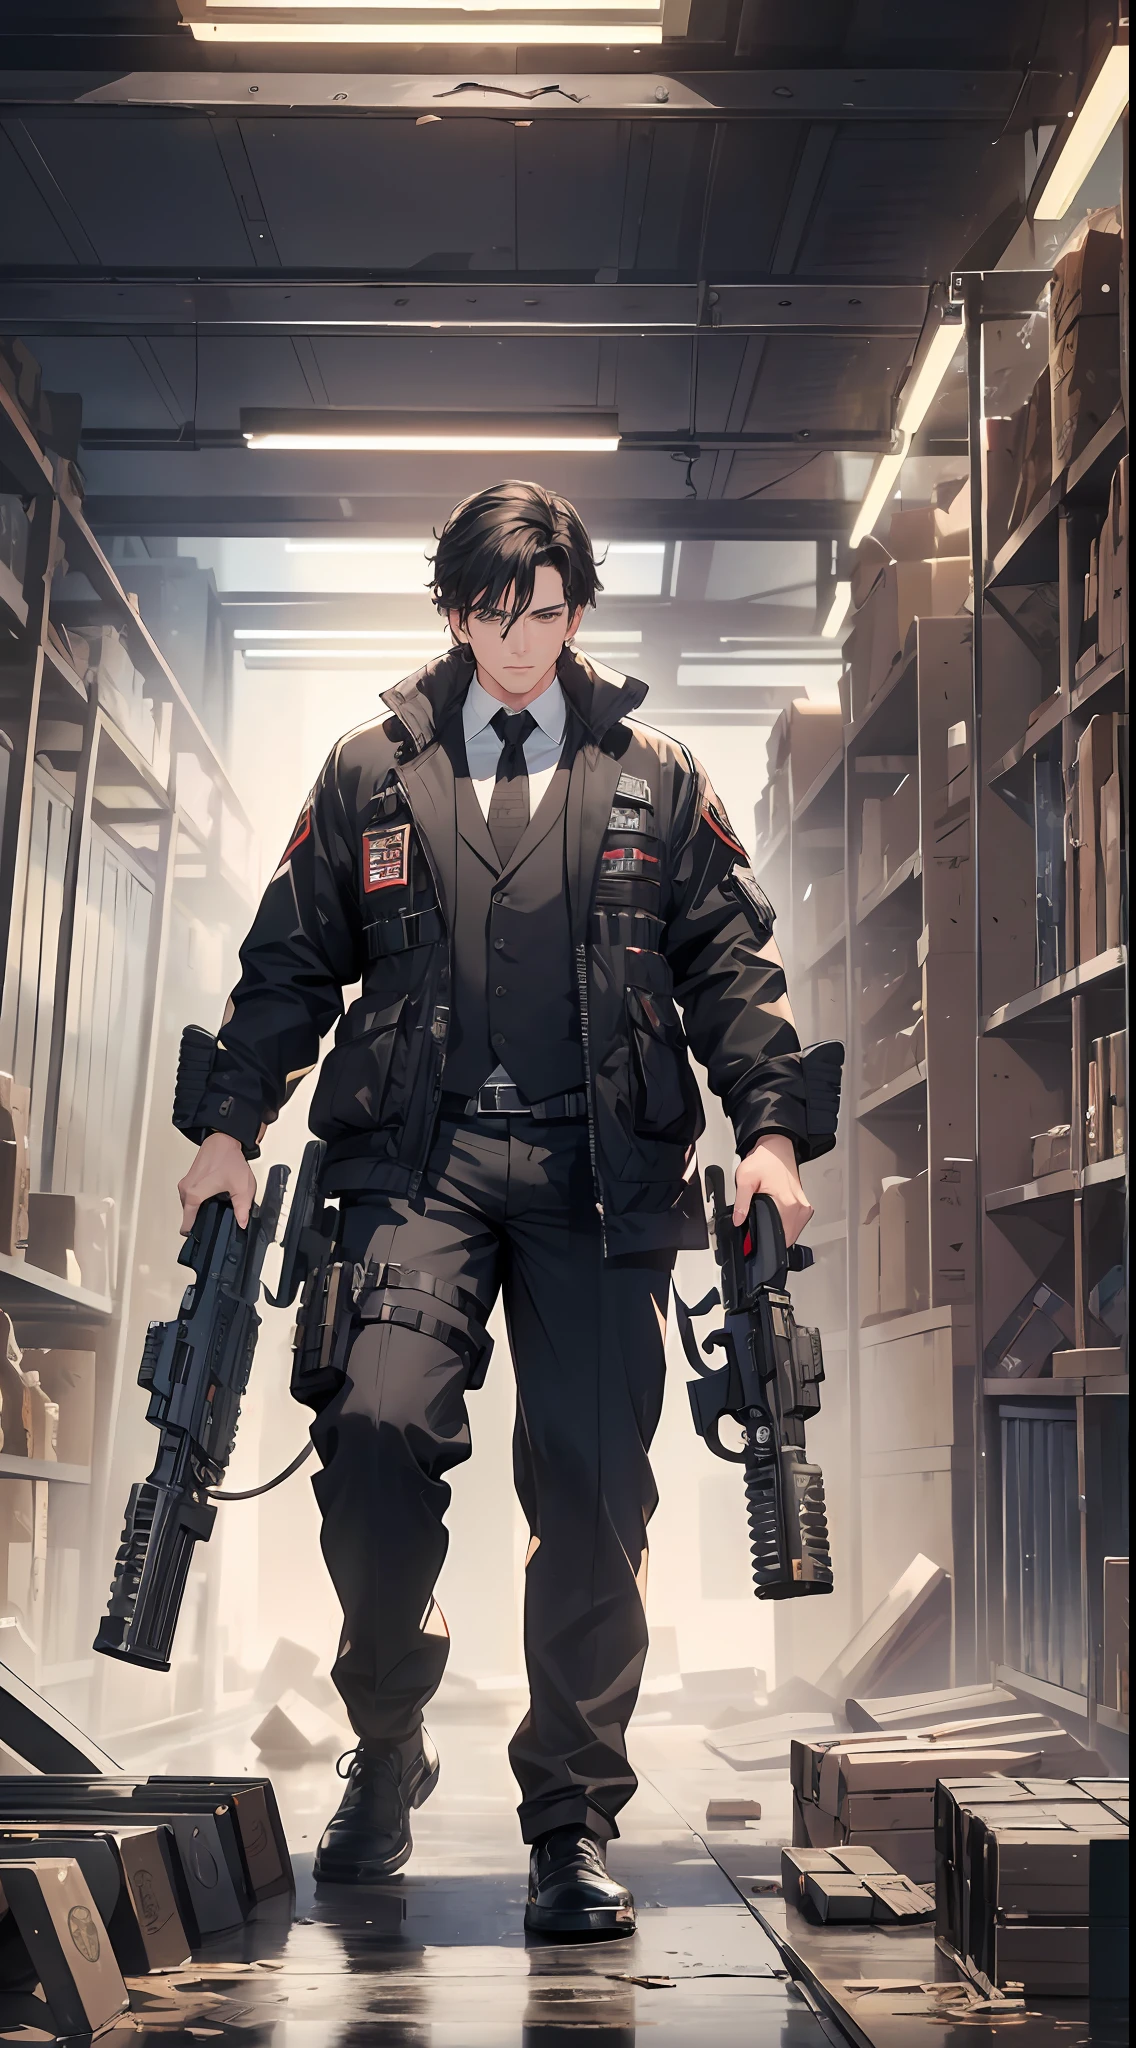 A thirty-year-old middle-aged man in a black suit with short black hair stands in an arsenal piled with pistols, submachine guns (the background is stacked with guns and ammunition weapons warehouse 1.5) (piled with guns and ammunition 1.8) (best quality: 1.1) (Perspective 1.5) (Masterpiece: 1.3) with an unparalleled masterpiece, surreal 8K, perfect artwork, super detail, best quality, masterpiece 4K wallpaper aesthetics, masterpiece, award-winning artwork, official art, cinematic lighting (handsome young man 1.5) (Handsome 1.5) (Vicissitudes 1.3)